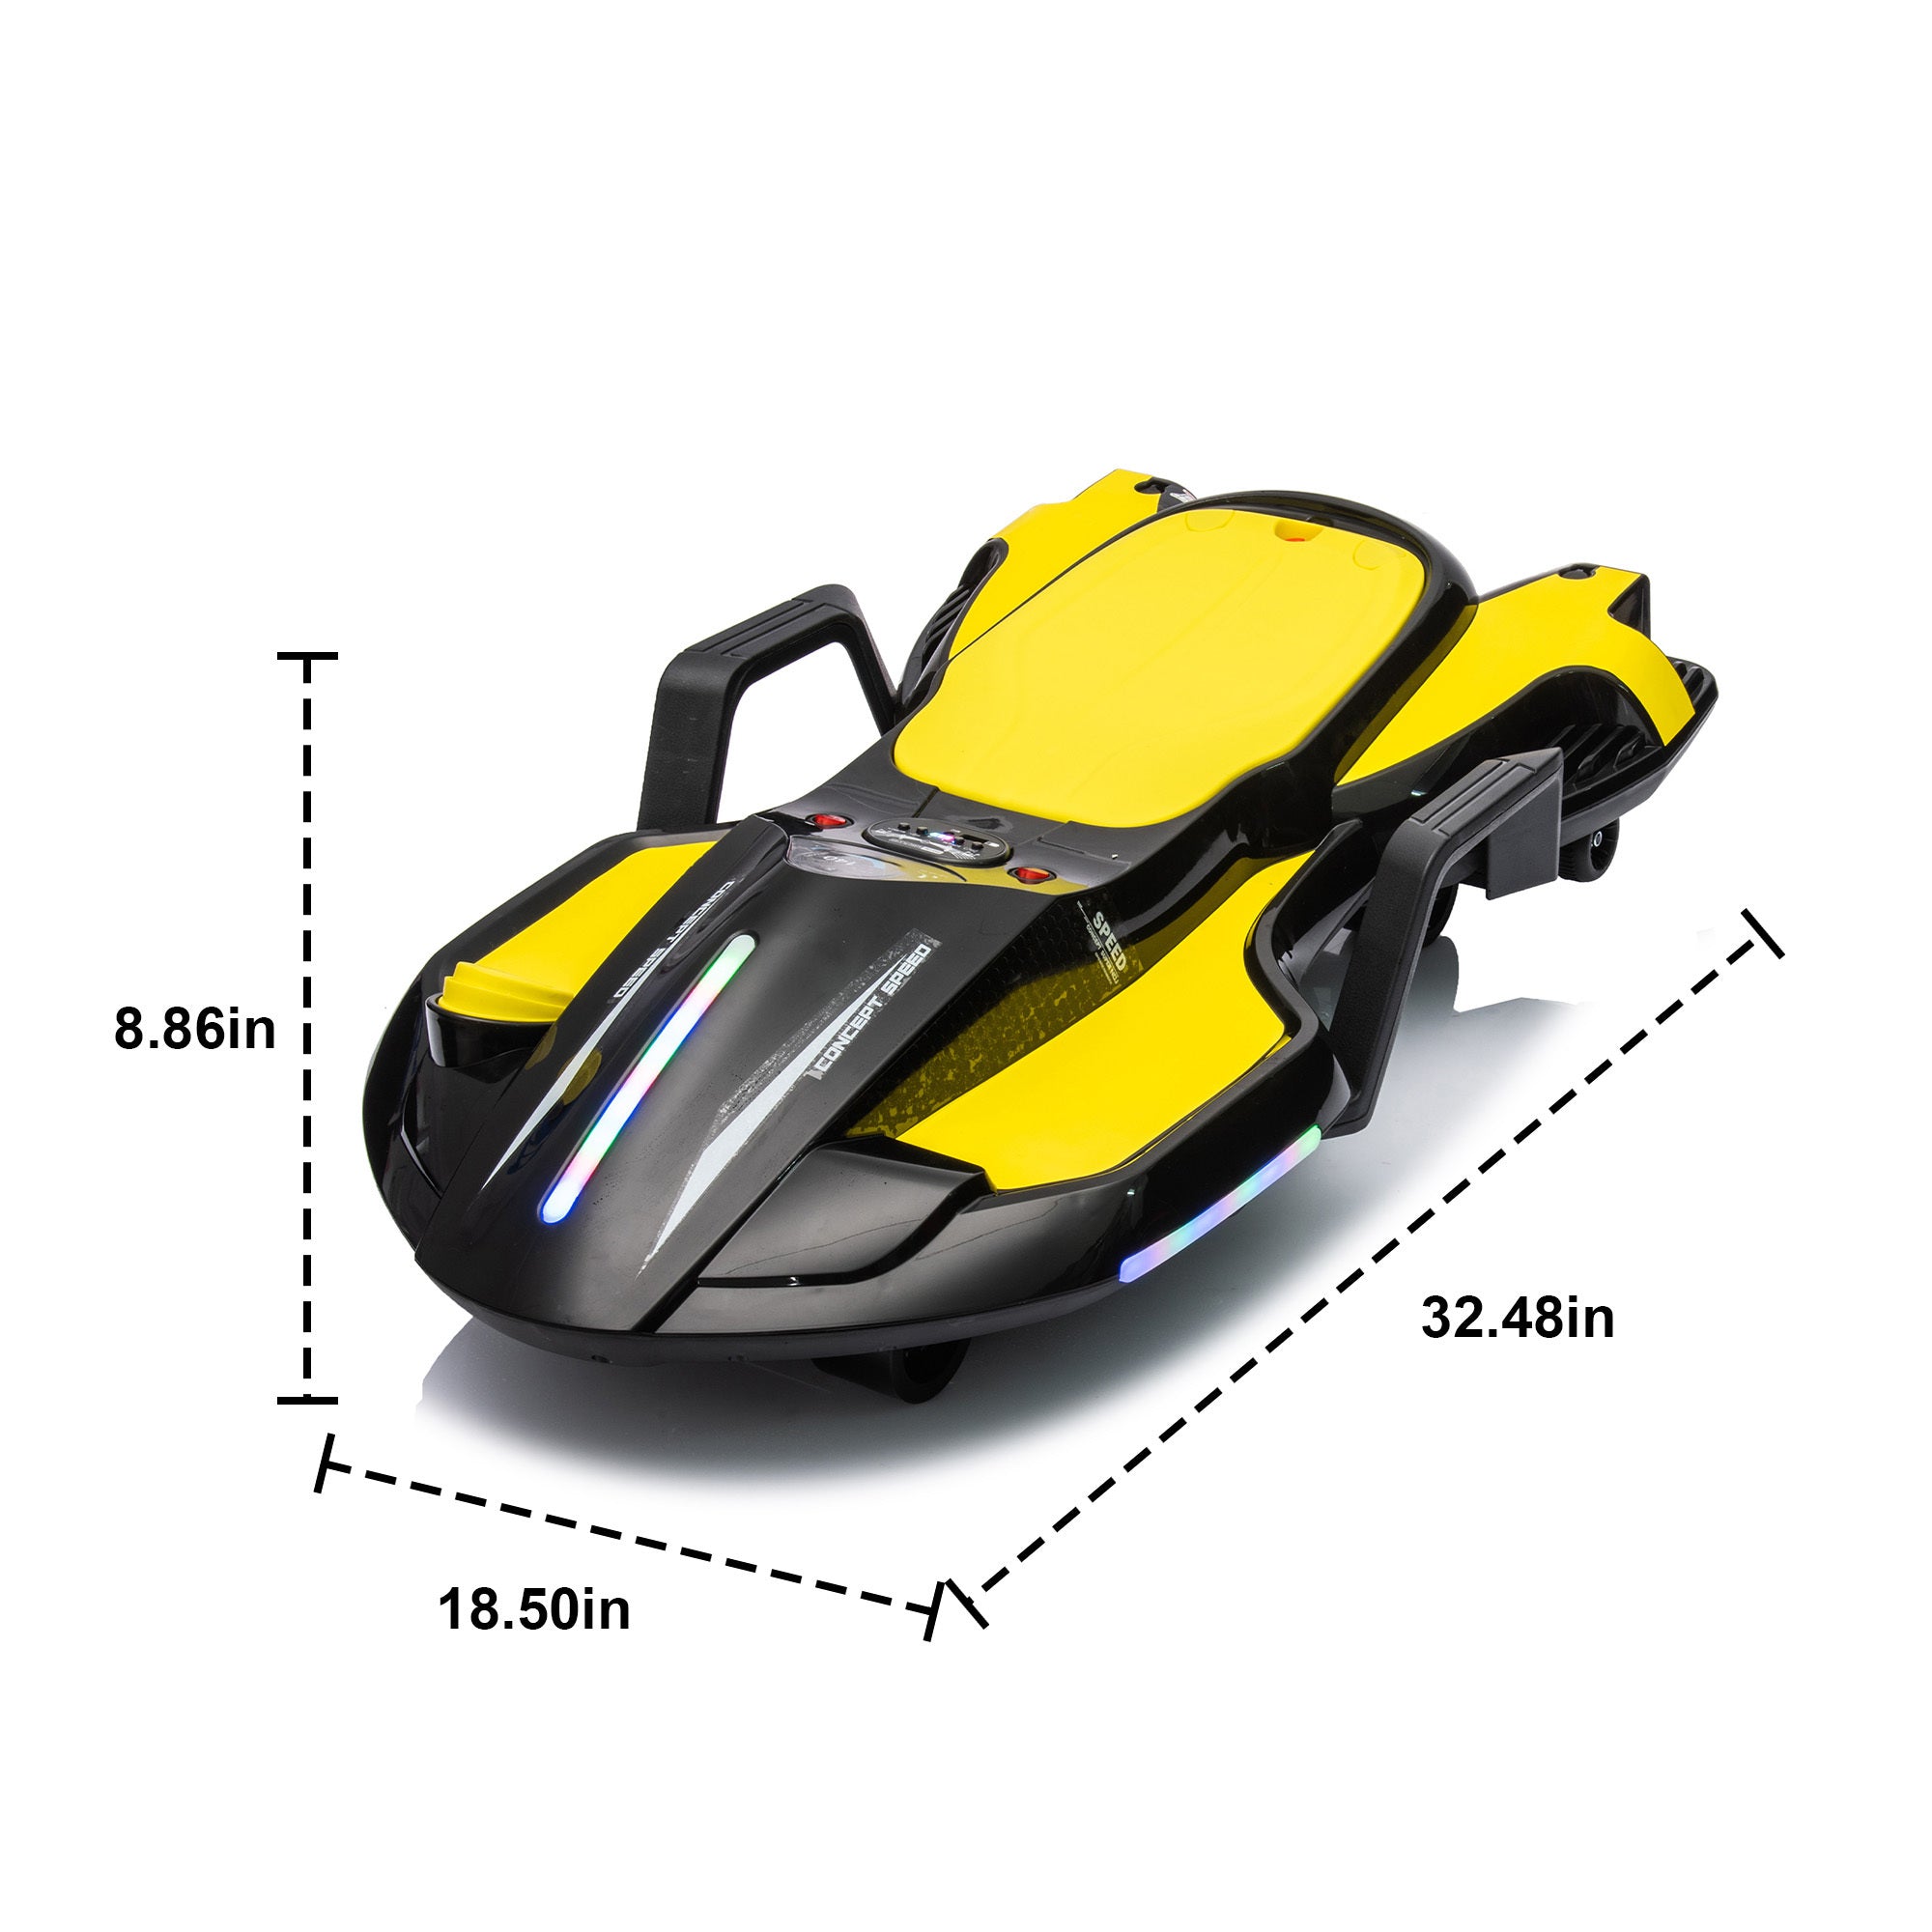 🆓🚛 24V Kids Ride On Electric Scooter W/ Helmet Knee Pads, Spray Function, 200W Motor, 5.59-6.84MPH, Gravity Steering, Bluetooth, Use for 1-2 Hours, Age 6+, Black & Yellow